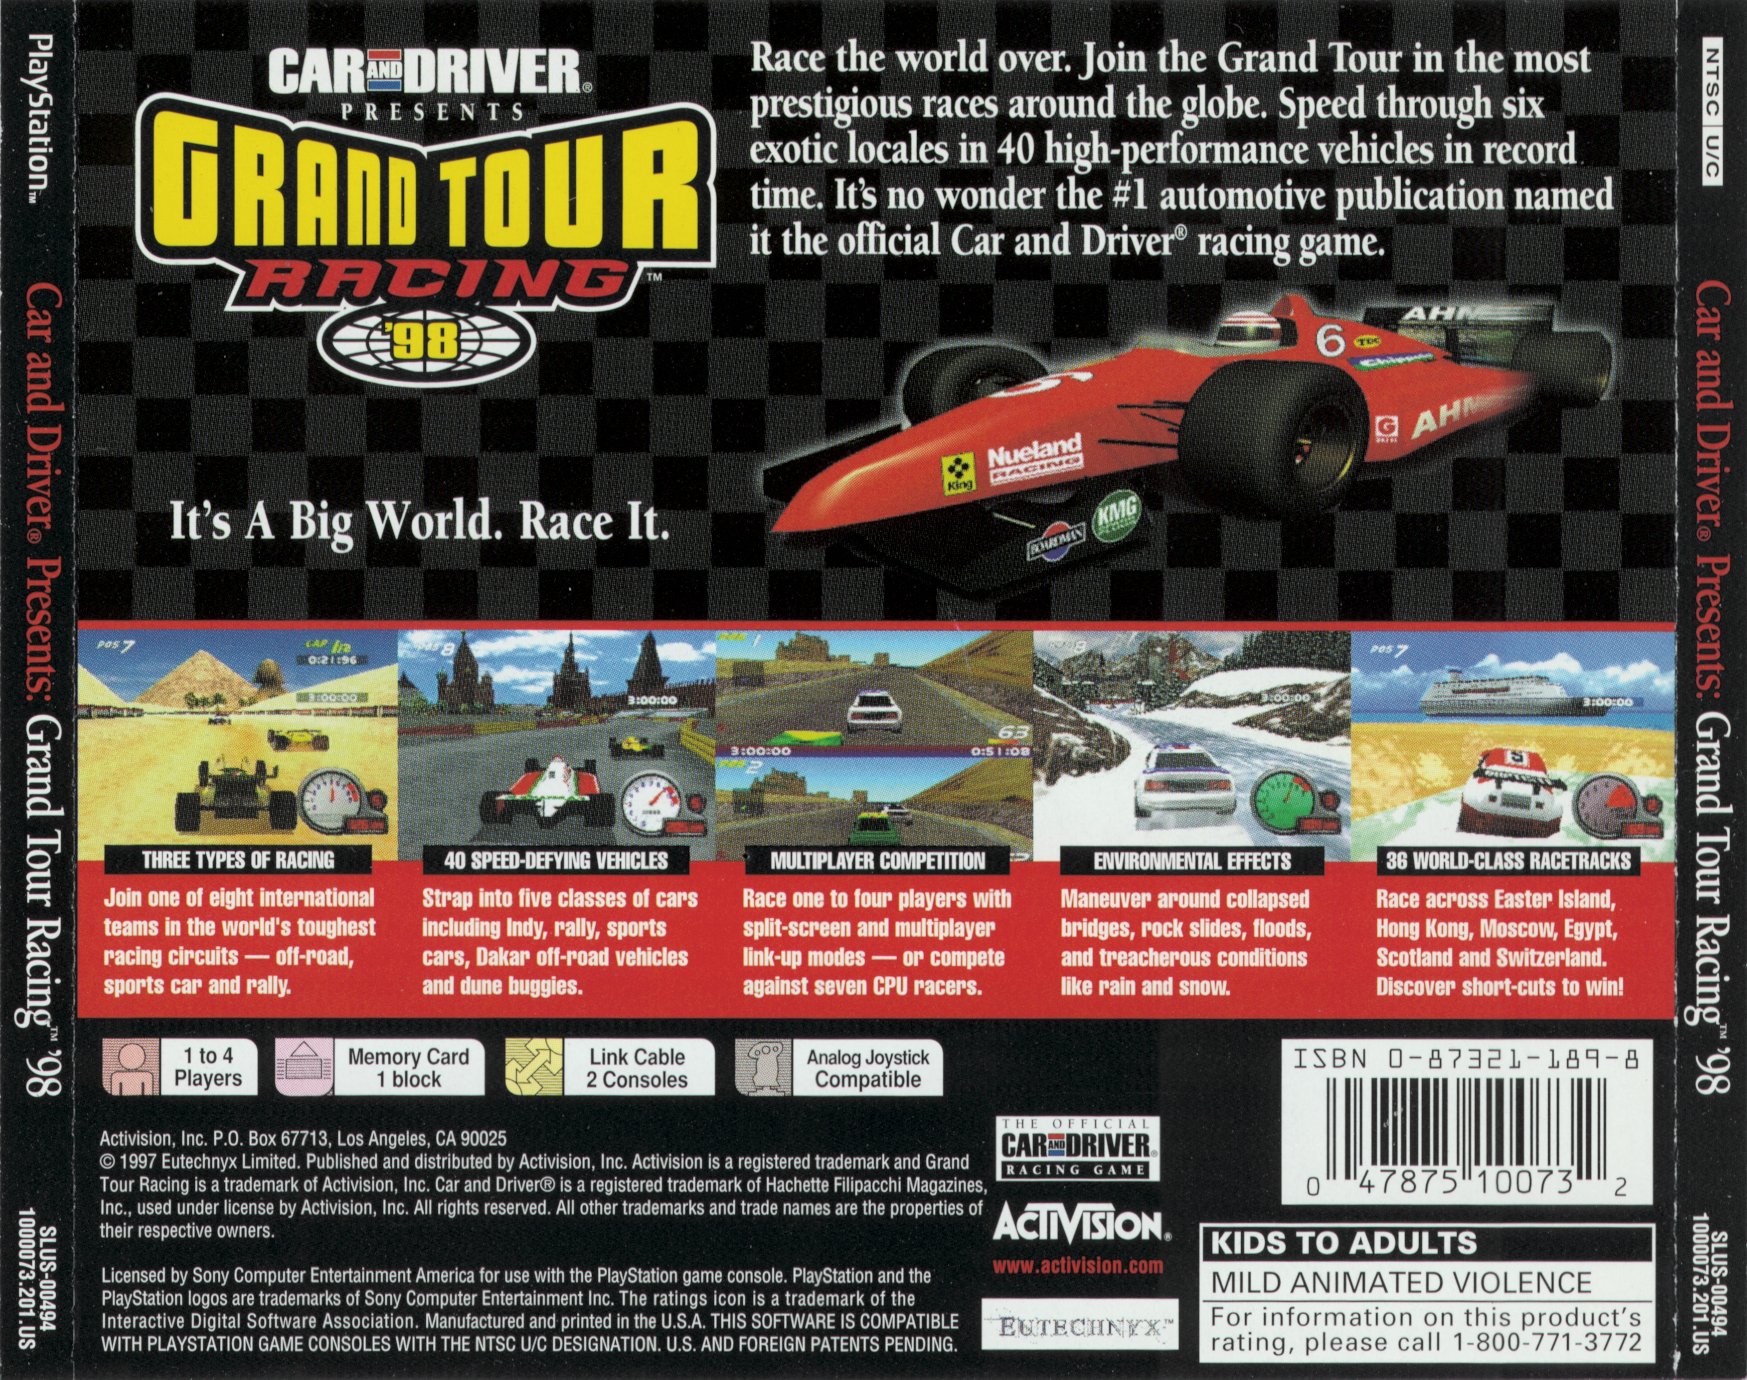 Car & Driver Presents - Grand Tour Racing '98 PSX cover